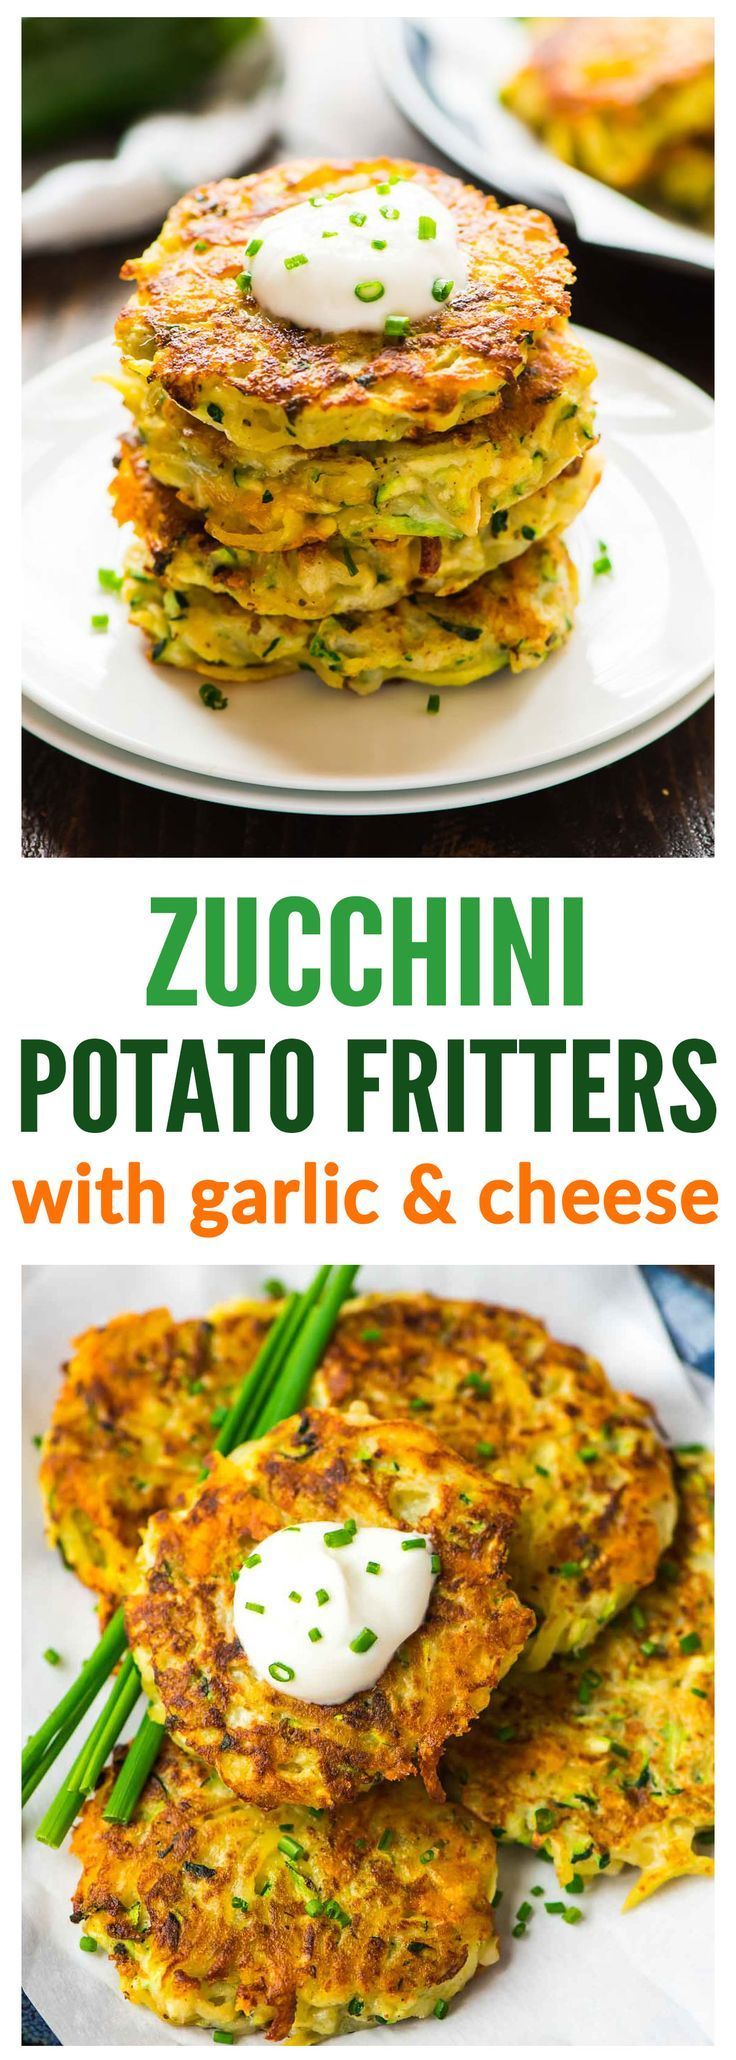 Cheesy Zucchini Potato Fritters. Picky eaters love these! Get kids to eat their veggies with this fast, easy recipe. Crispy on the outside, tender on the inside, with lots of cheese! Recipe at wellplated.com | @wellplated @picknsavestores -   22 vegetable recipes for picky eaters
 ideas